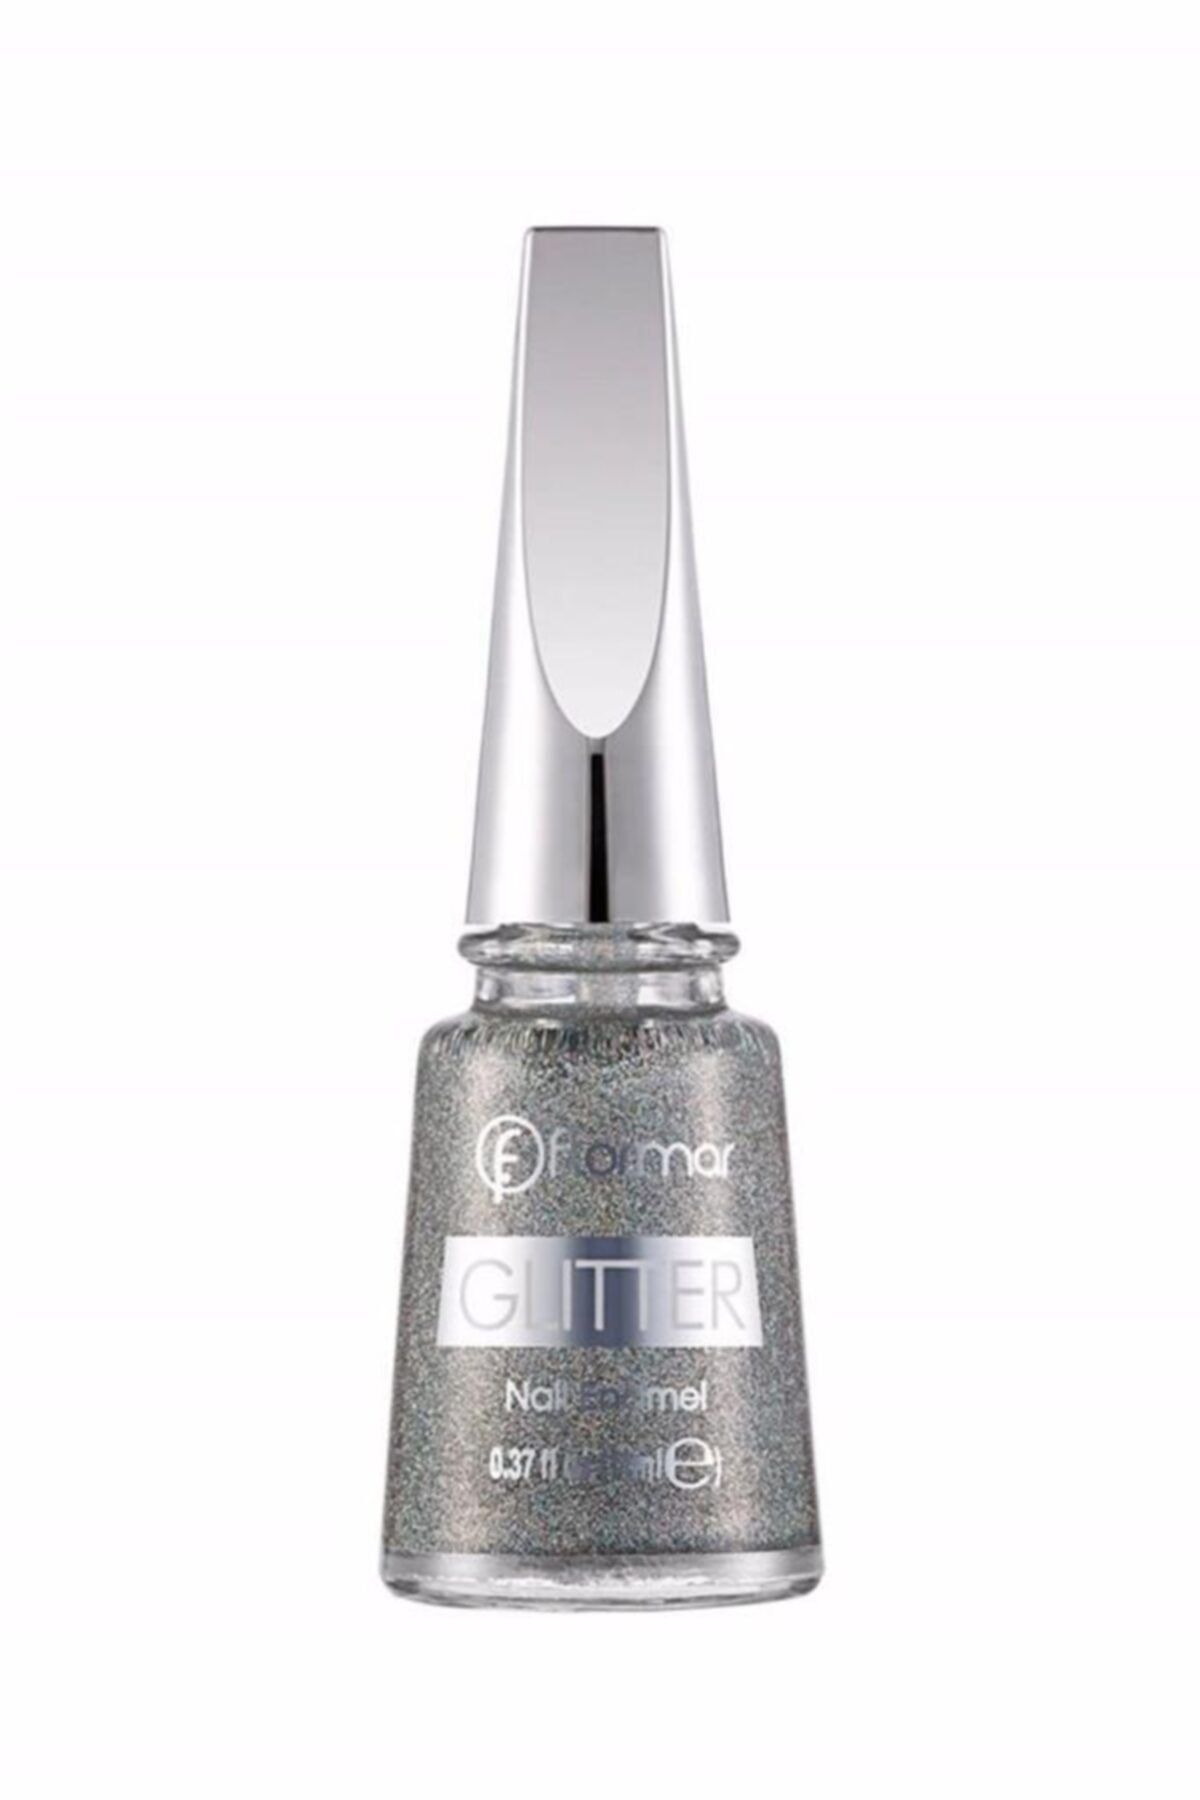 Flormar Glitter Holographic Silver 38 Oje